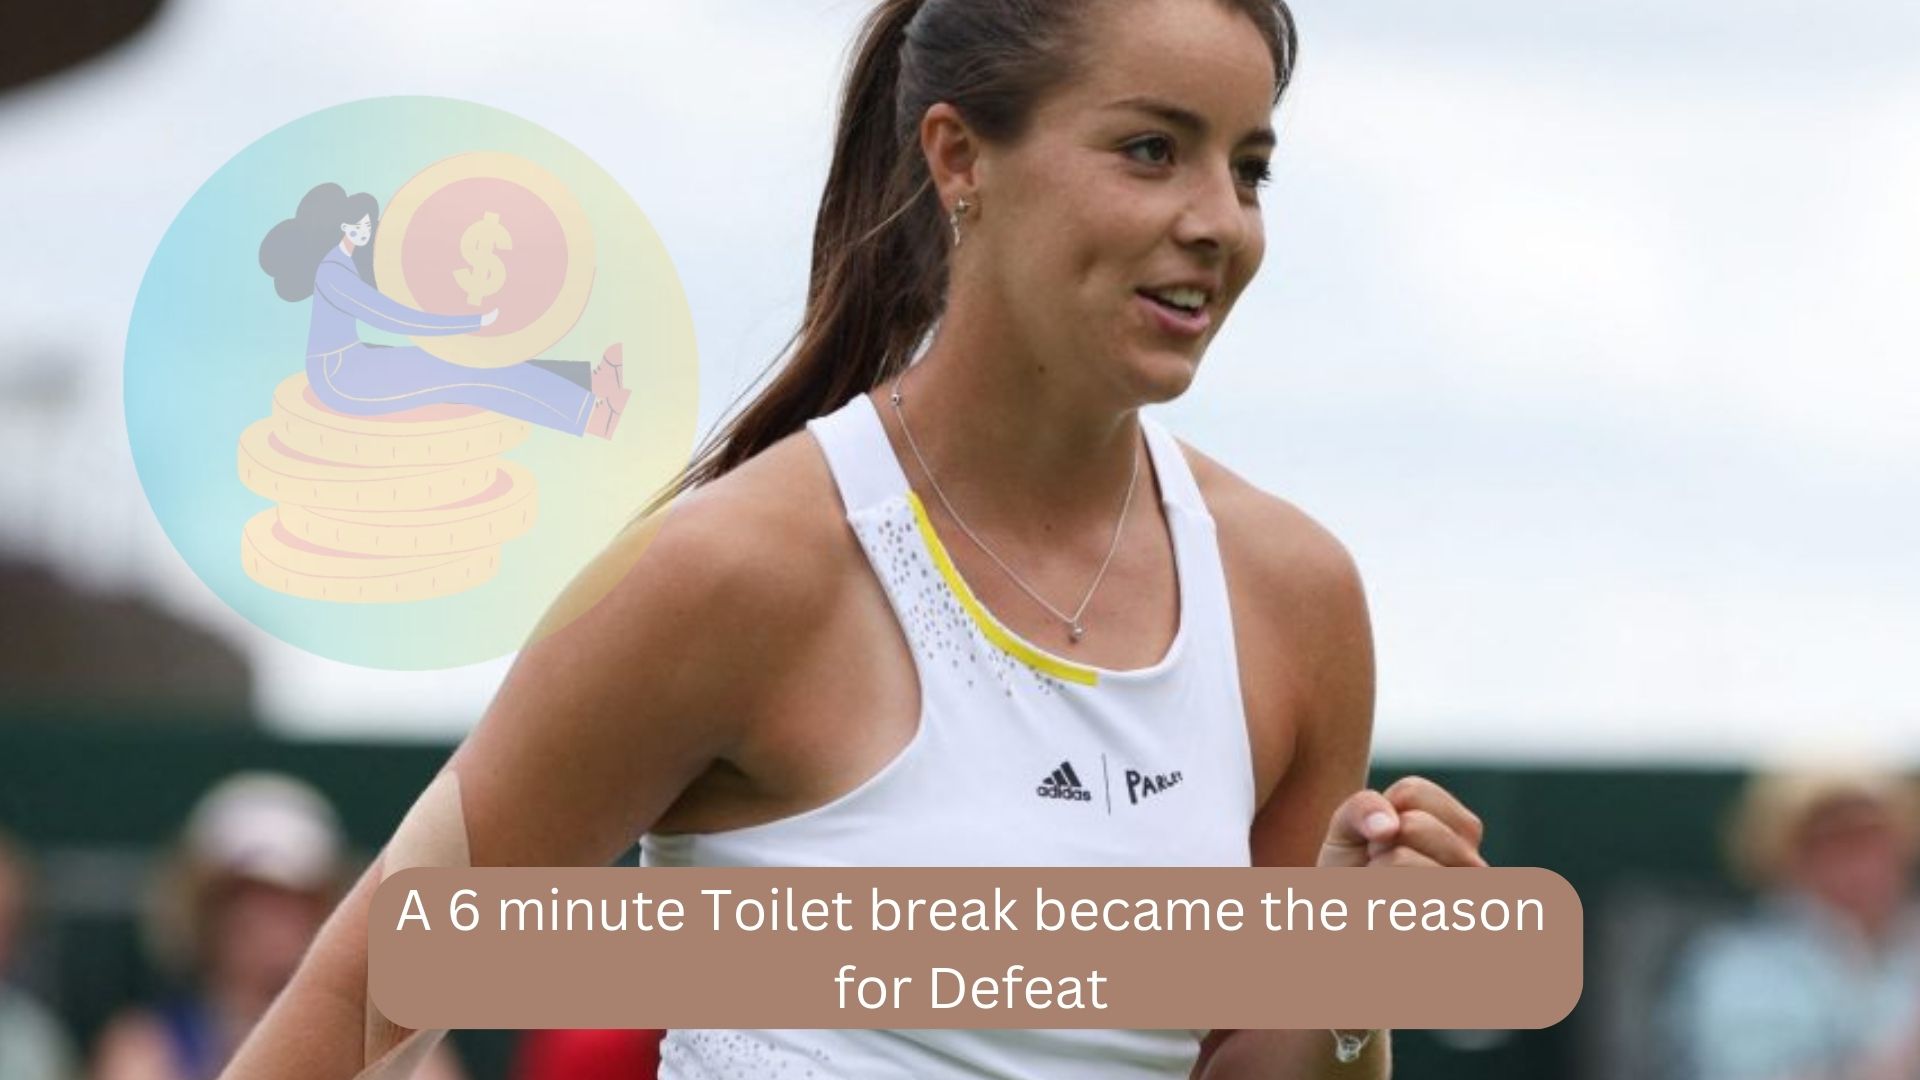 A 6 minute Toilet break became the reason for Defeat